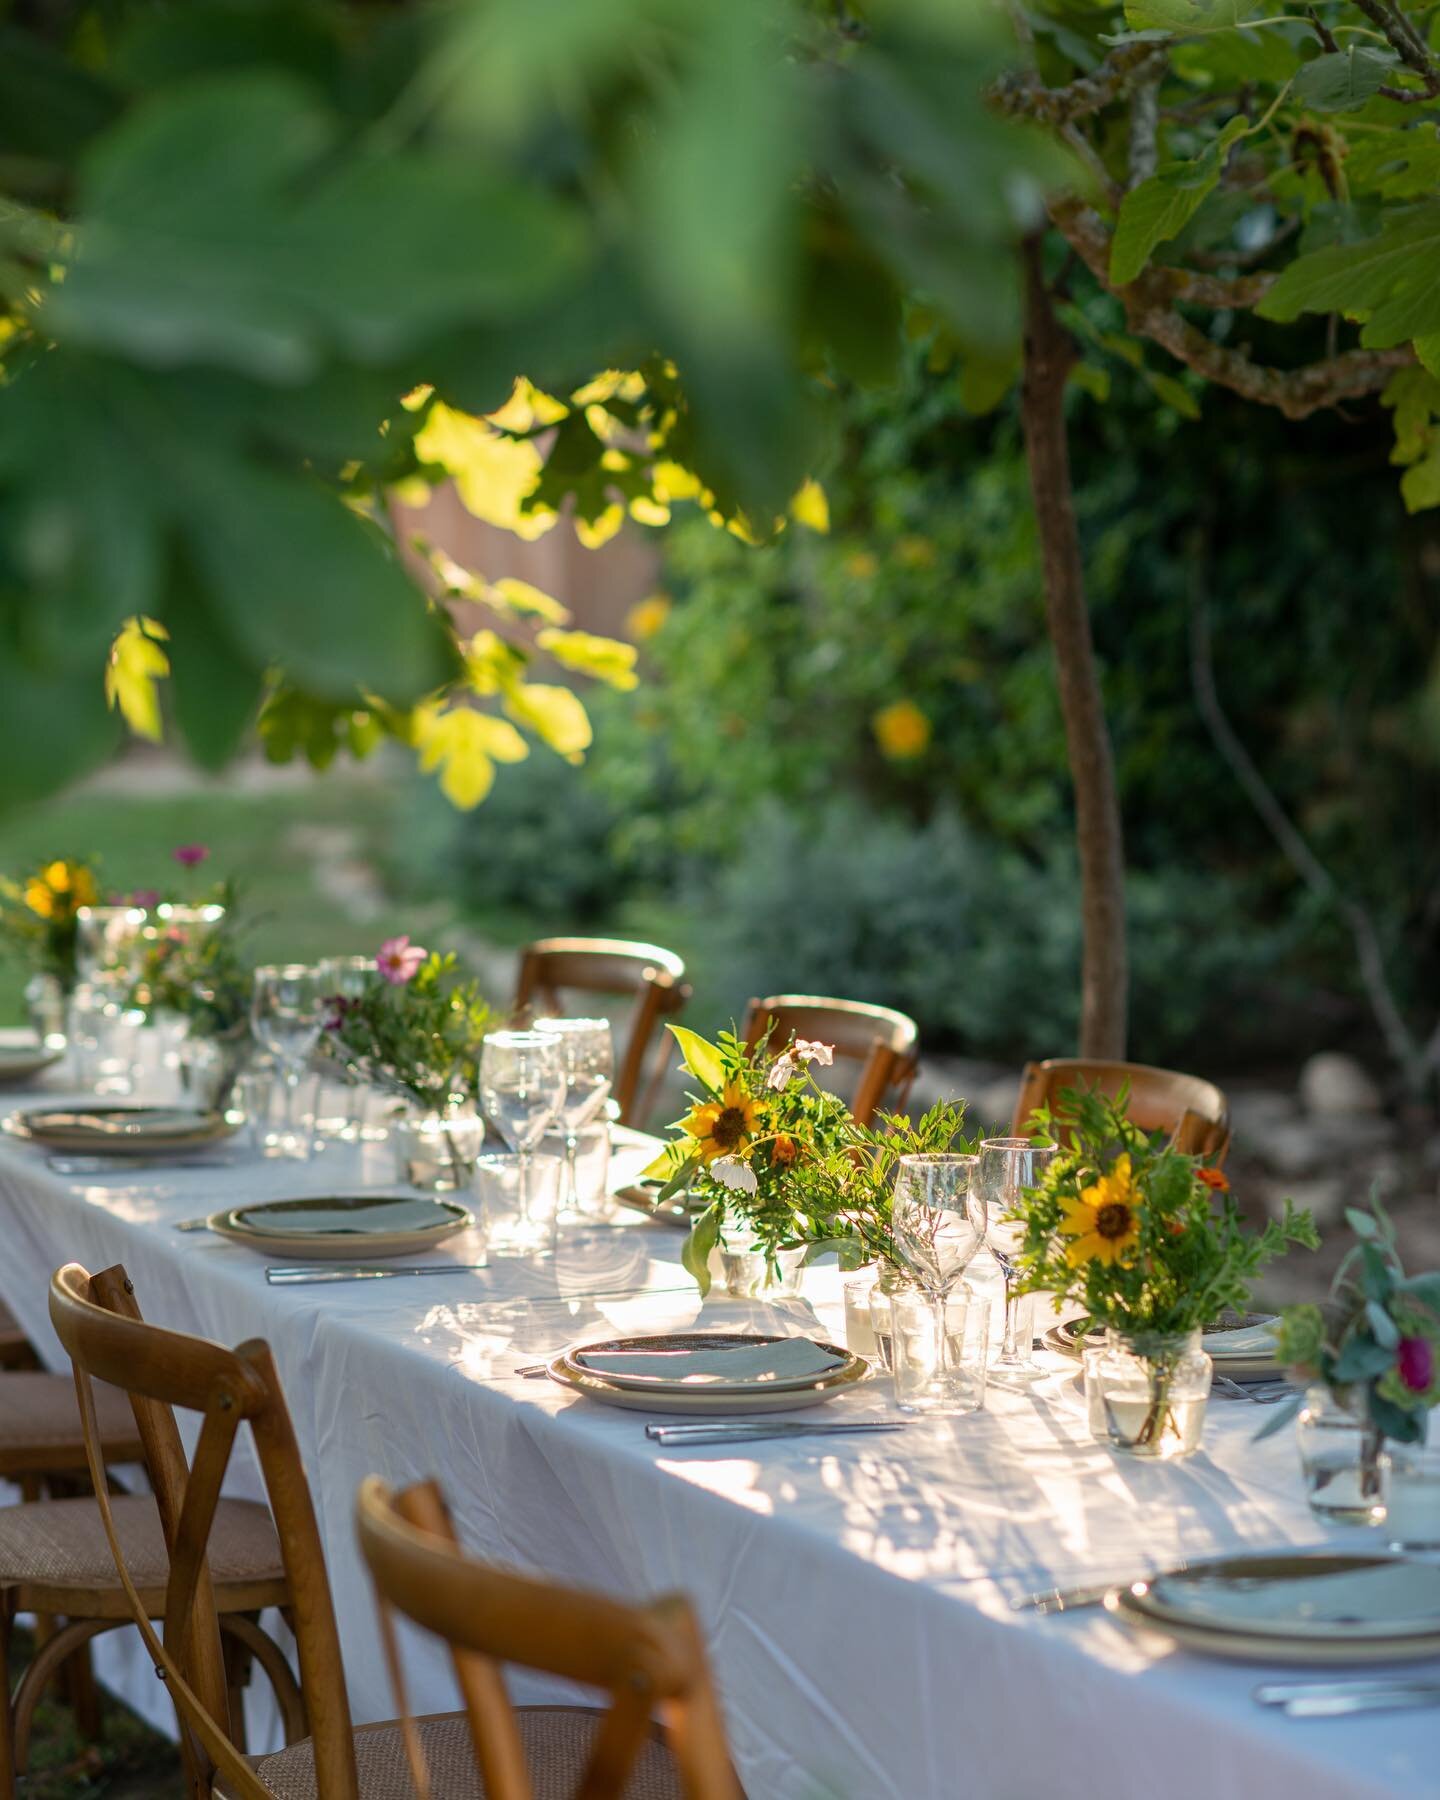 Thank you @gypsywestwoodphotography for the stunning photos of Sunday&rsquo;s Supper Club at the most gorgeous of settings @canquince 

💐Table decor by local flower artist Ani @templeofbloom who grows her own flowers here in Ibiza, so they are super